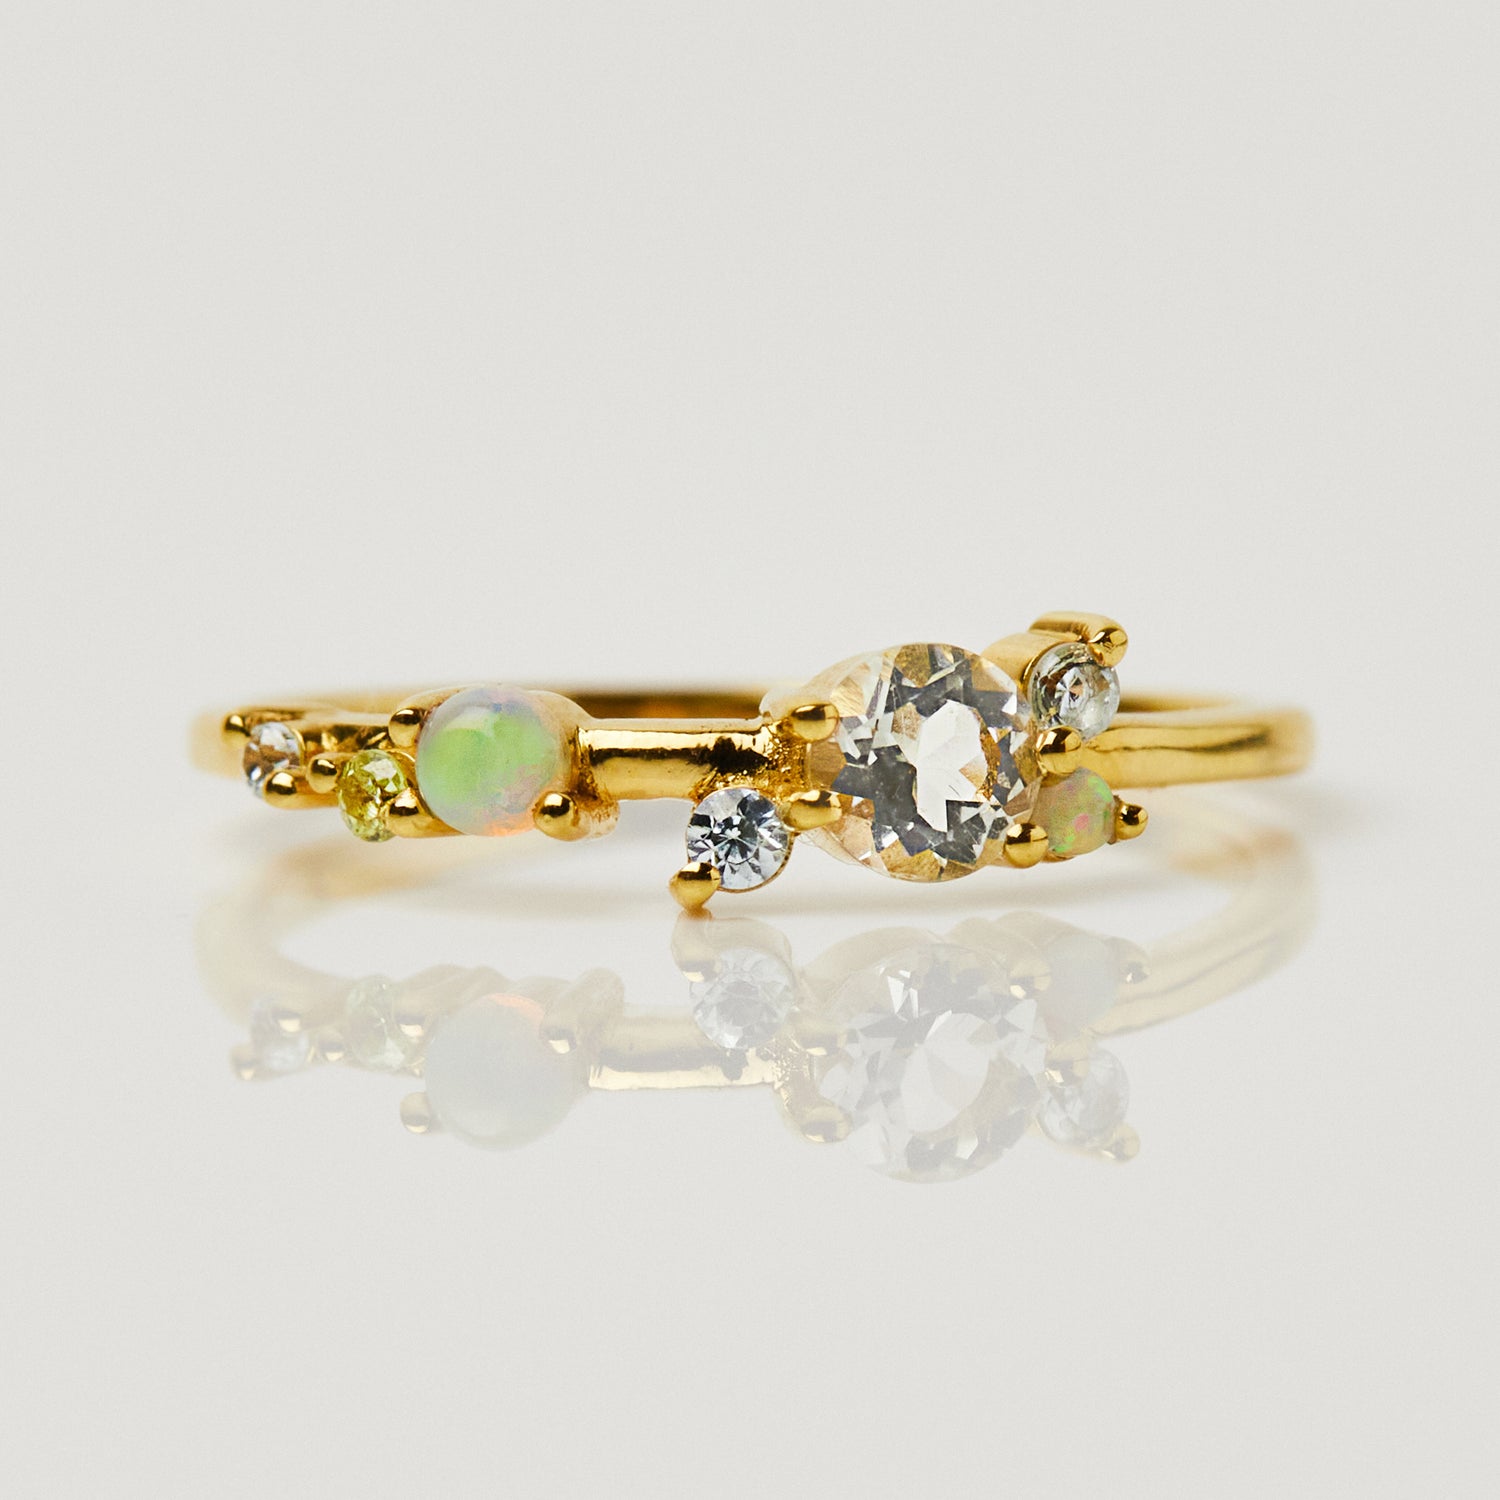 Eclectic Hug Ring